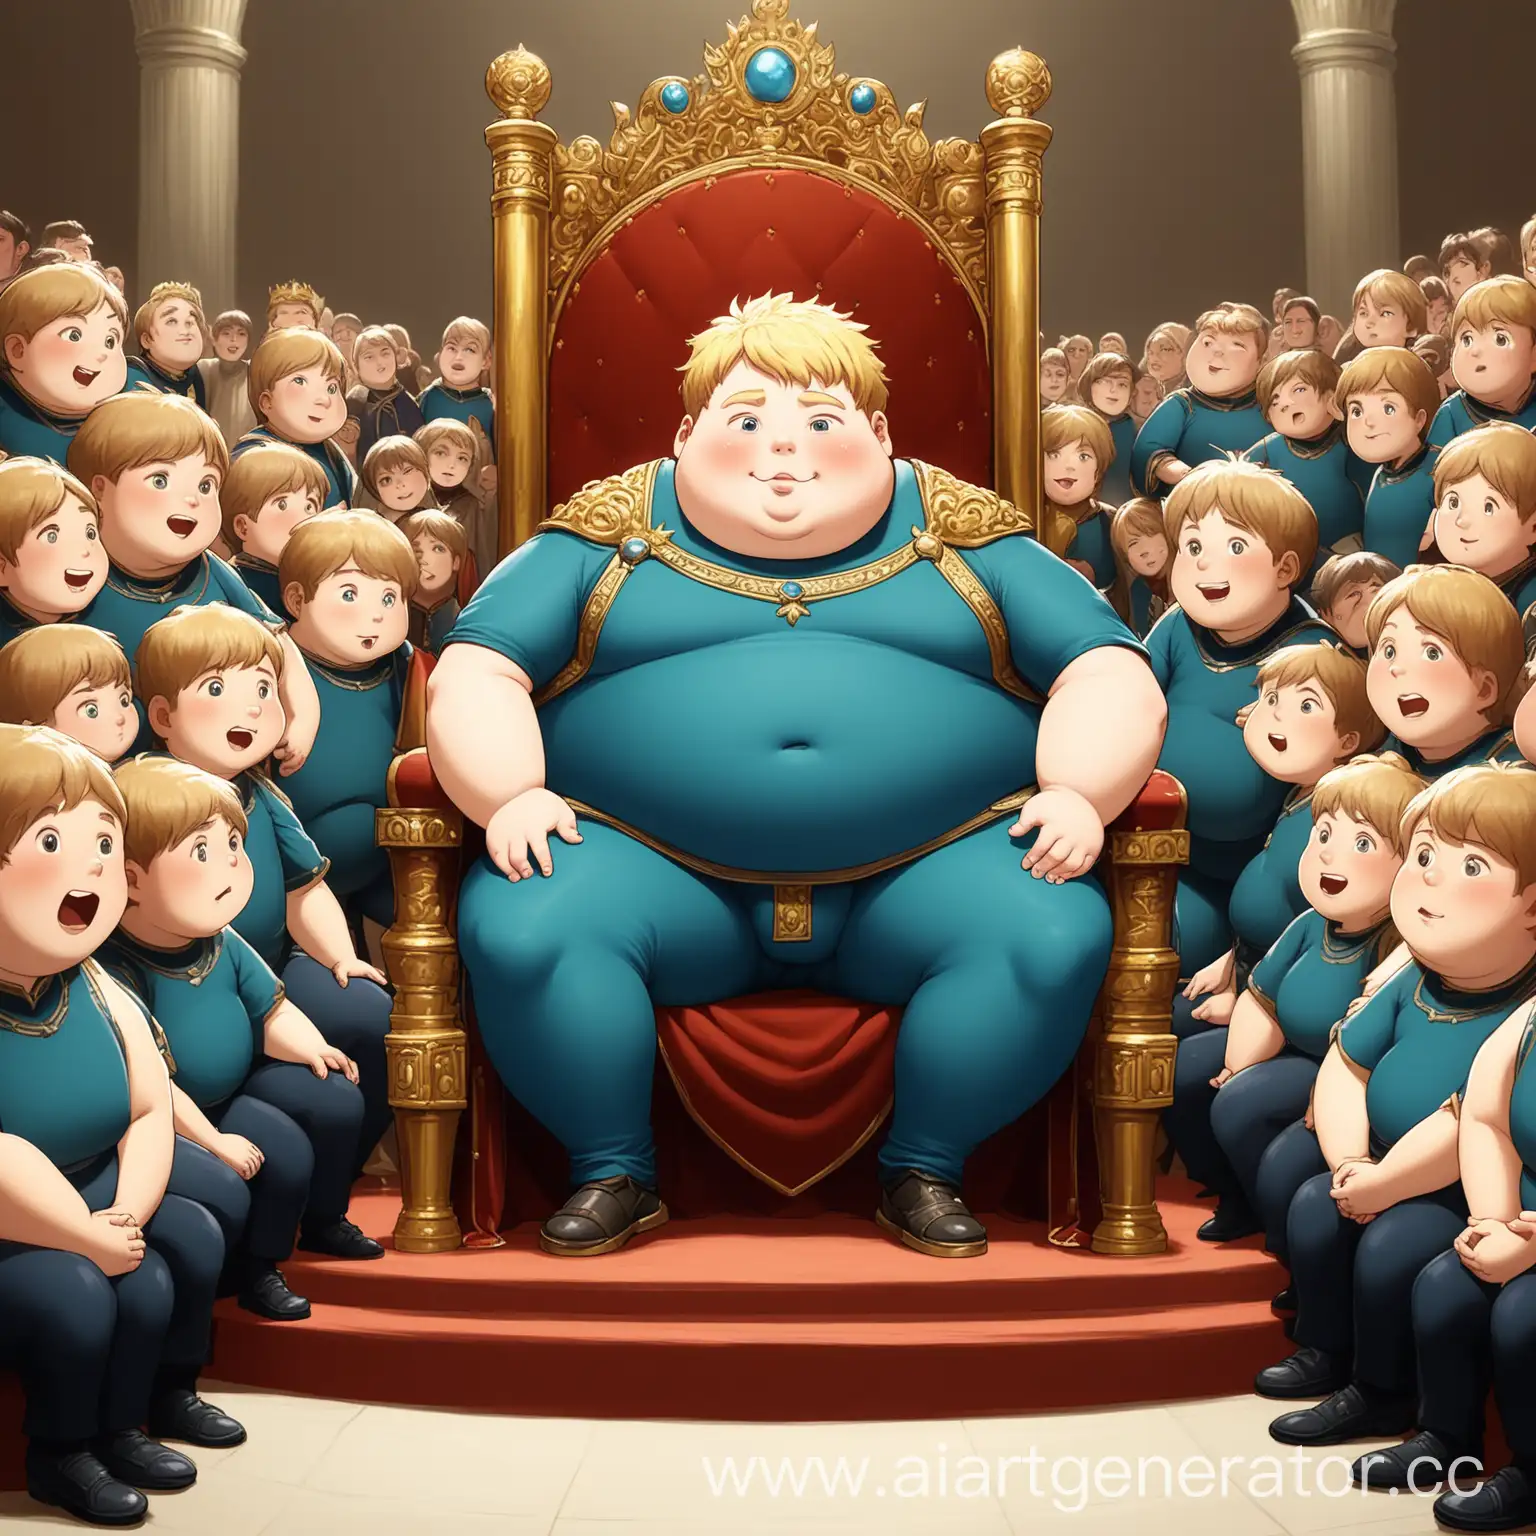 Chubby-FairHaired-Boy-Sitting-on-a-Throne-Surrounded-by-Courtiers